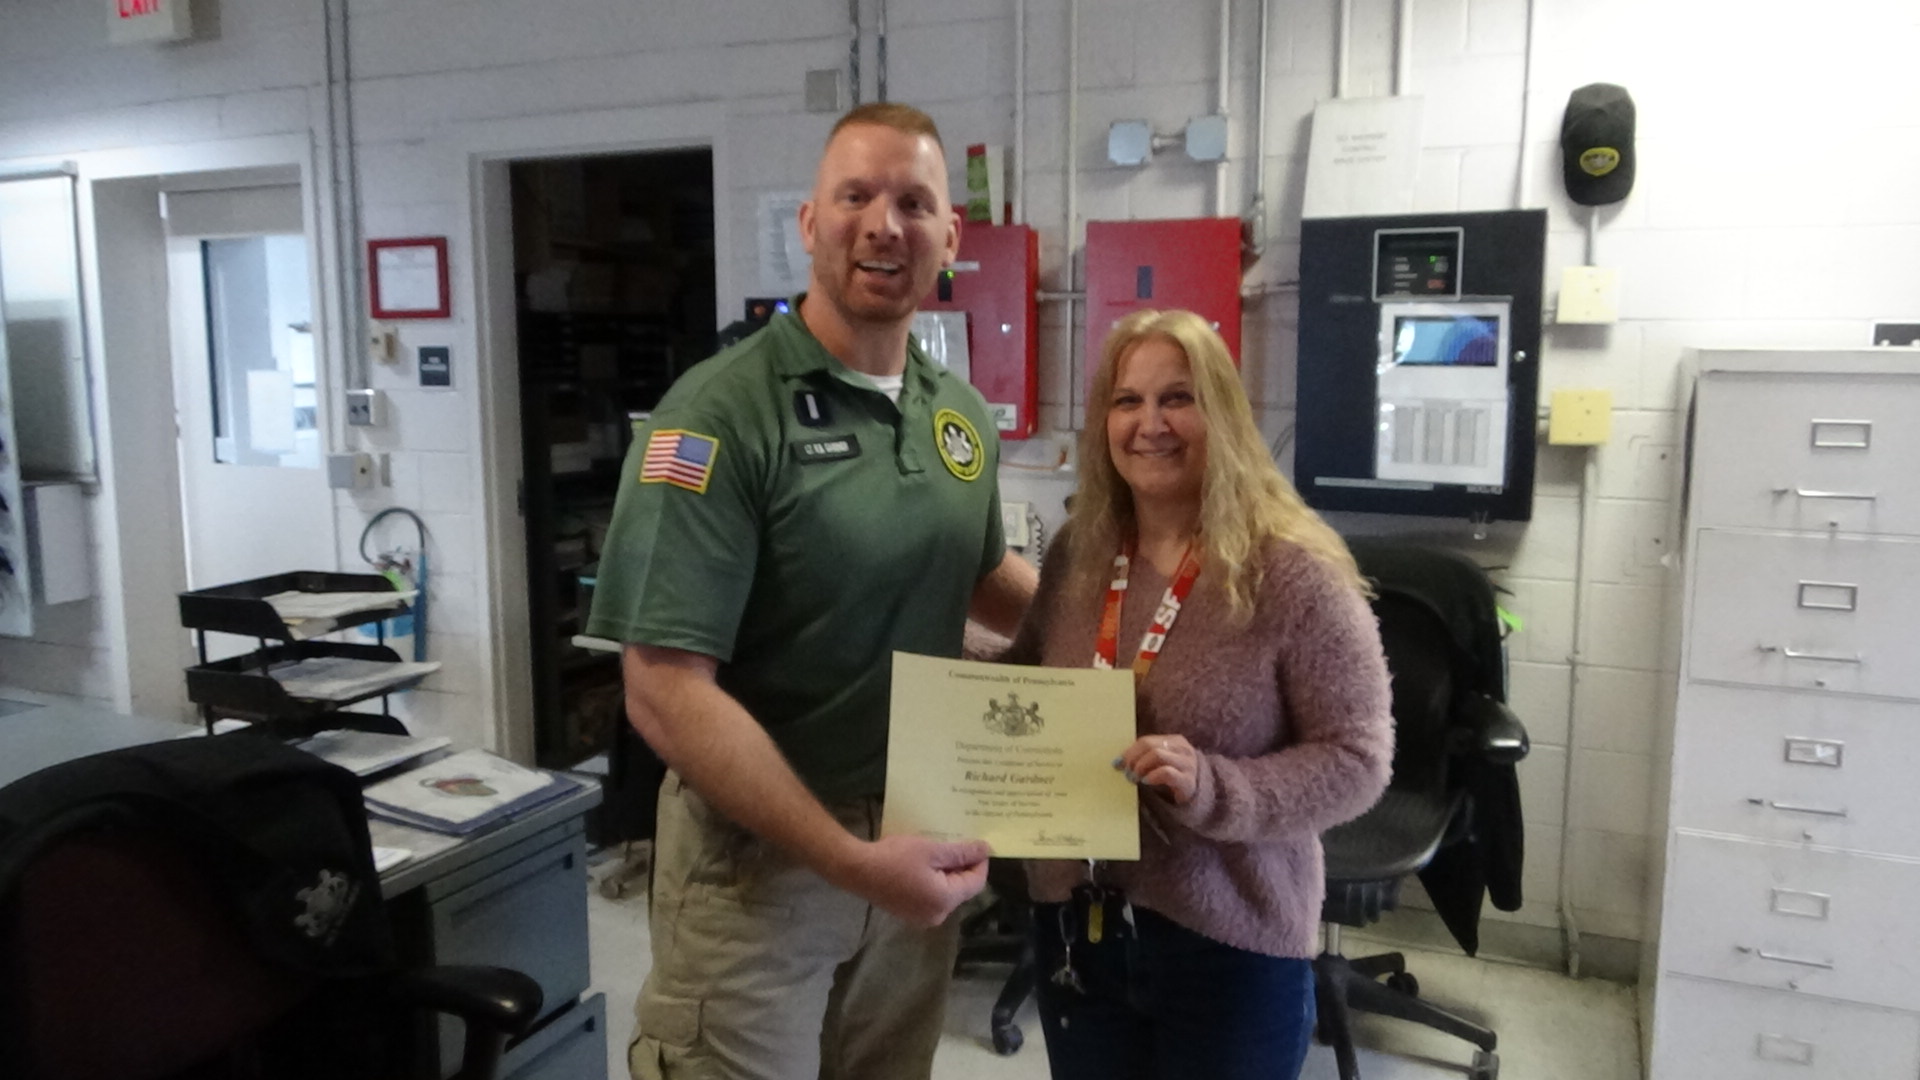 Lt. R. Gardner and CSA Christine Altemier holding a certificate.